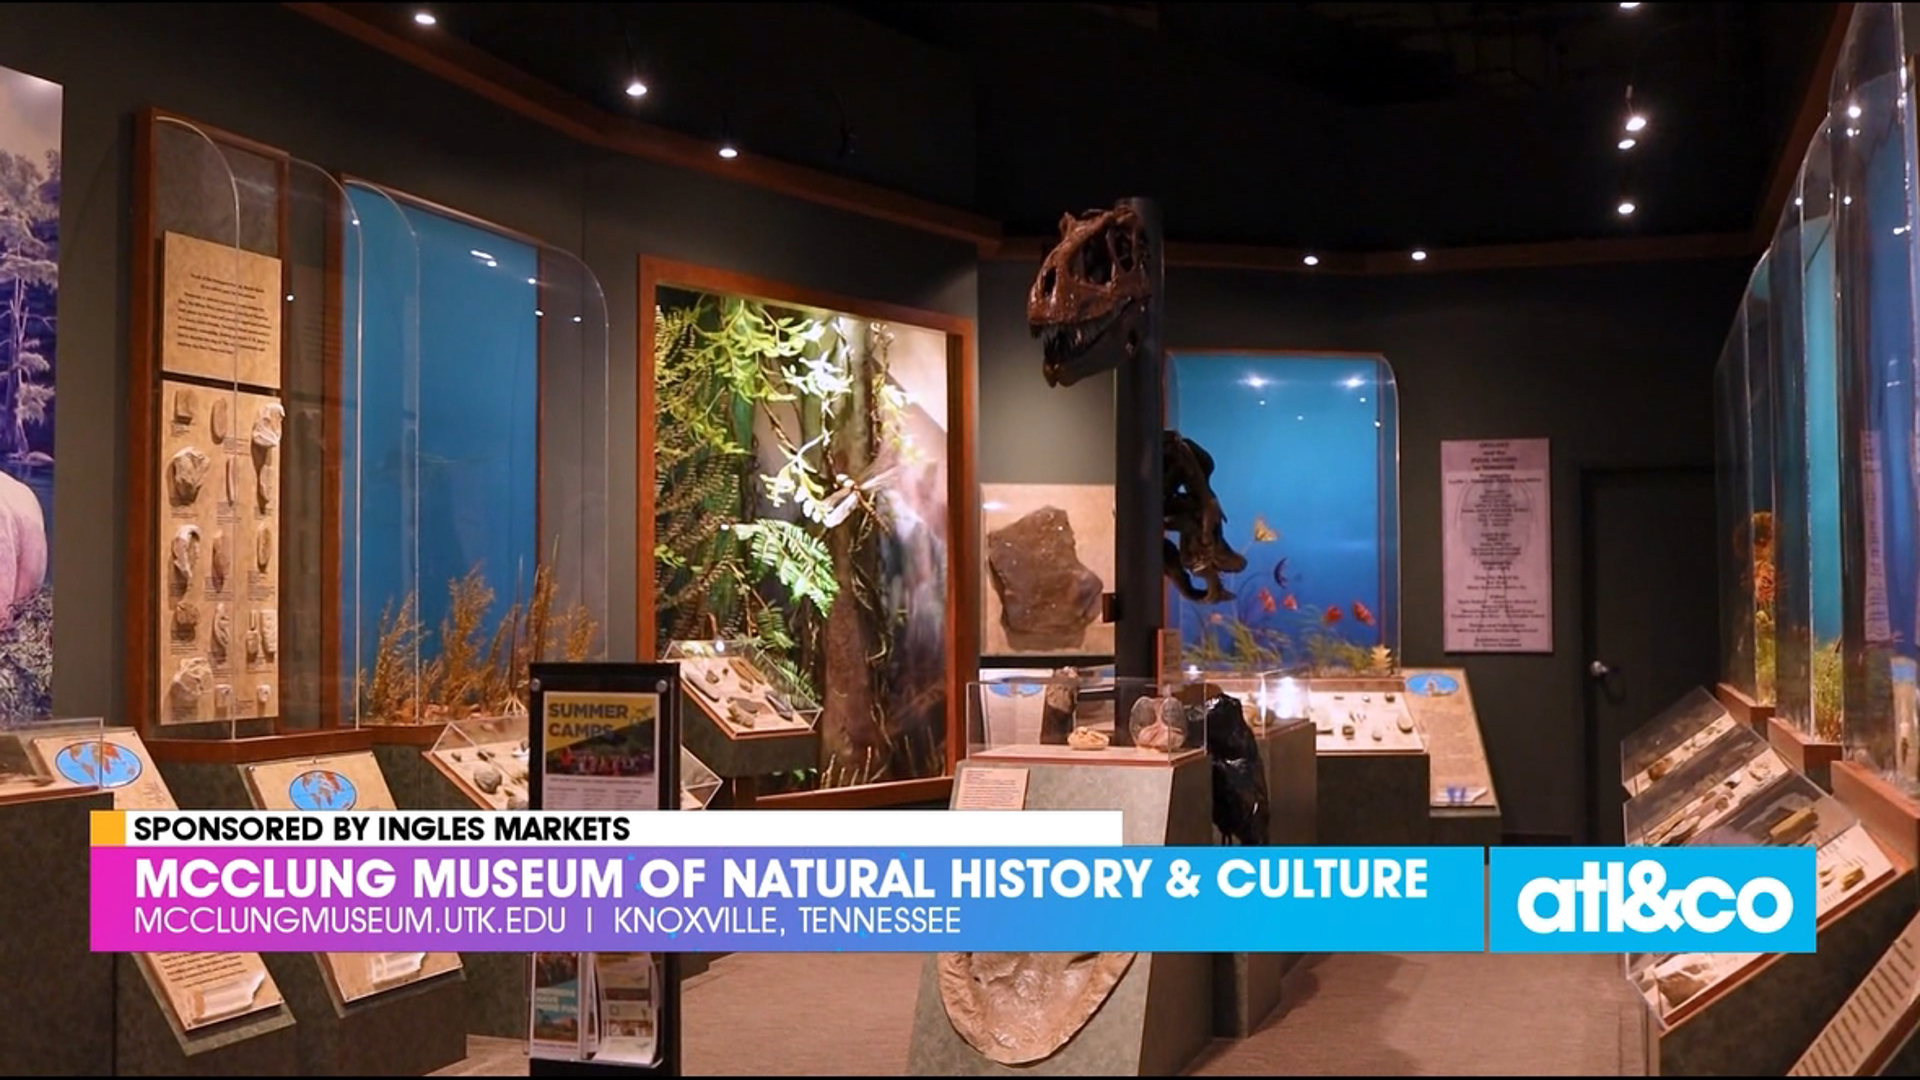 A transformative experience! Explore the McClung Museum of Natural History & Culture at the University of Tennessee Knoxville with Ingles Markets.